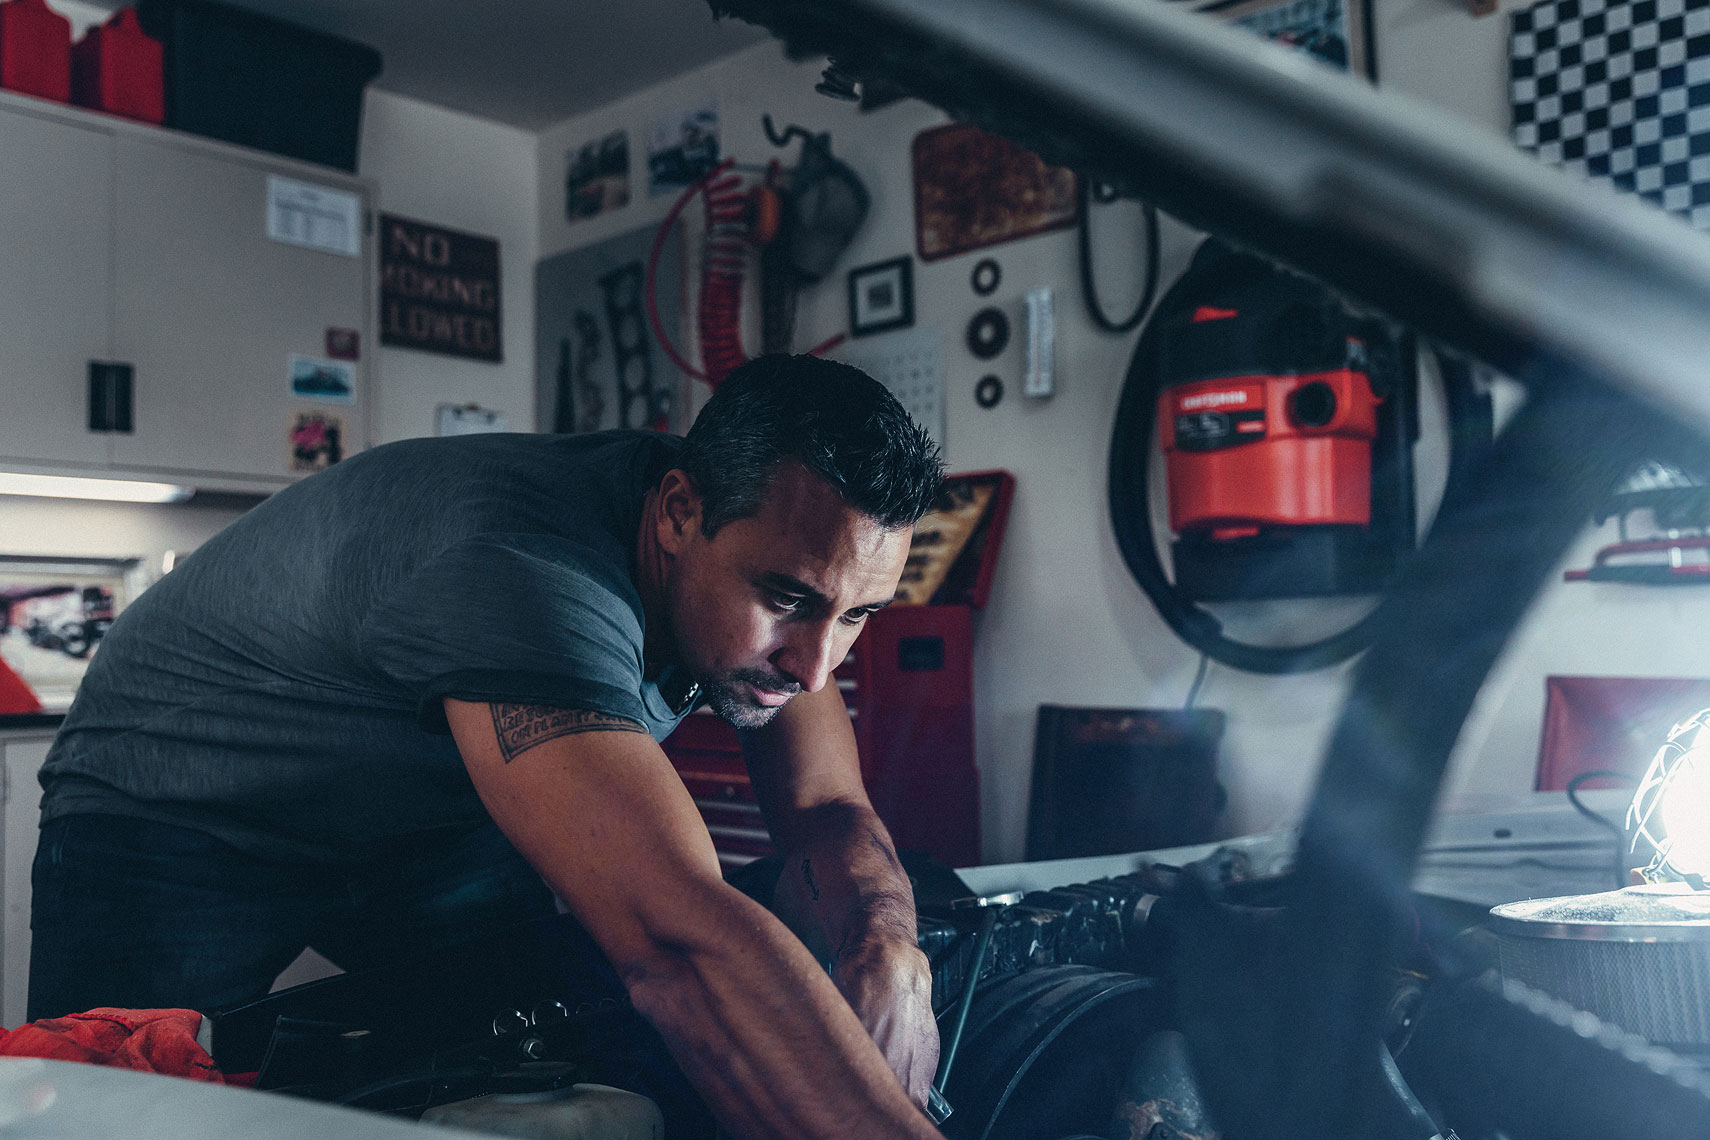 Craftsman Tools 5 Gallon Wet/Dry Vacuum | Man working on car in garage. | John Fedele Product Photography